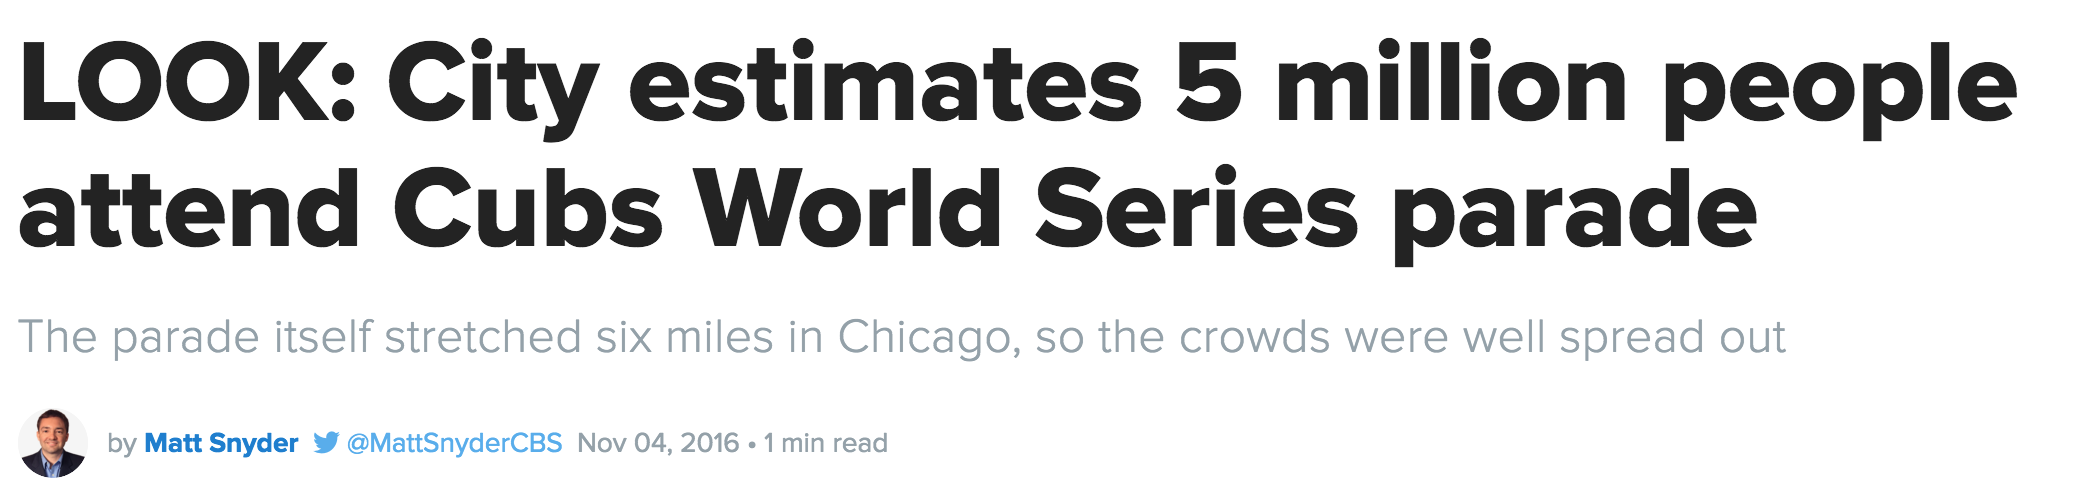 "Look: City estimates 5 million people attend cubs world series parade"